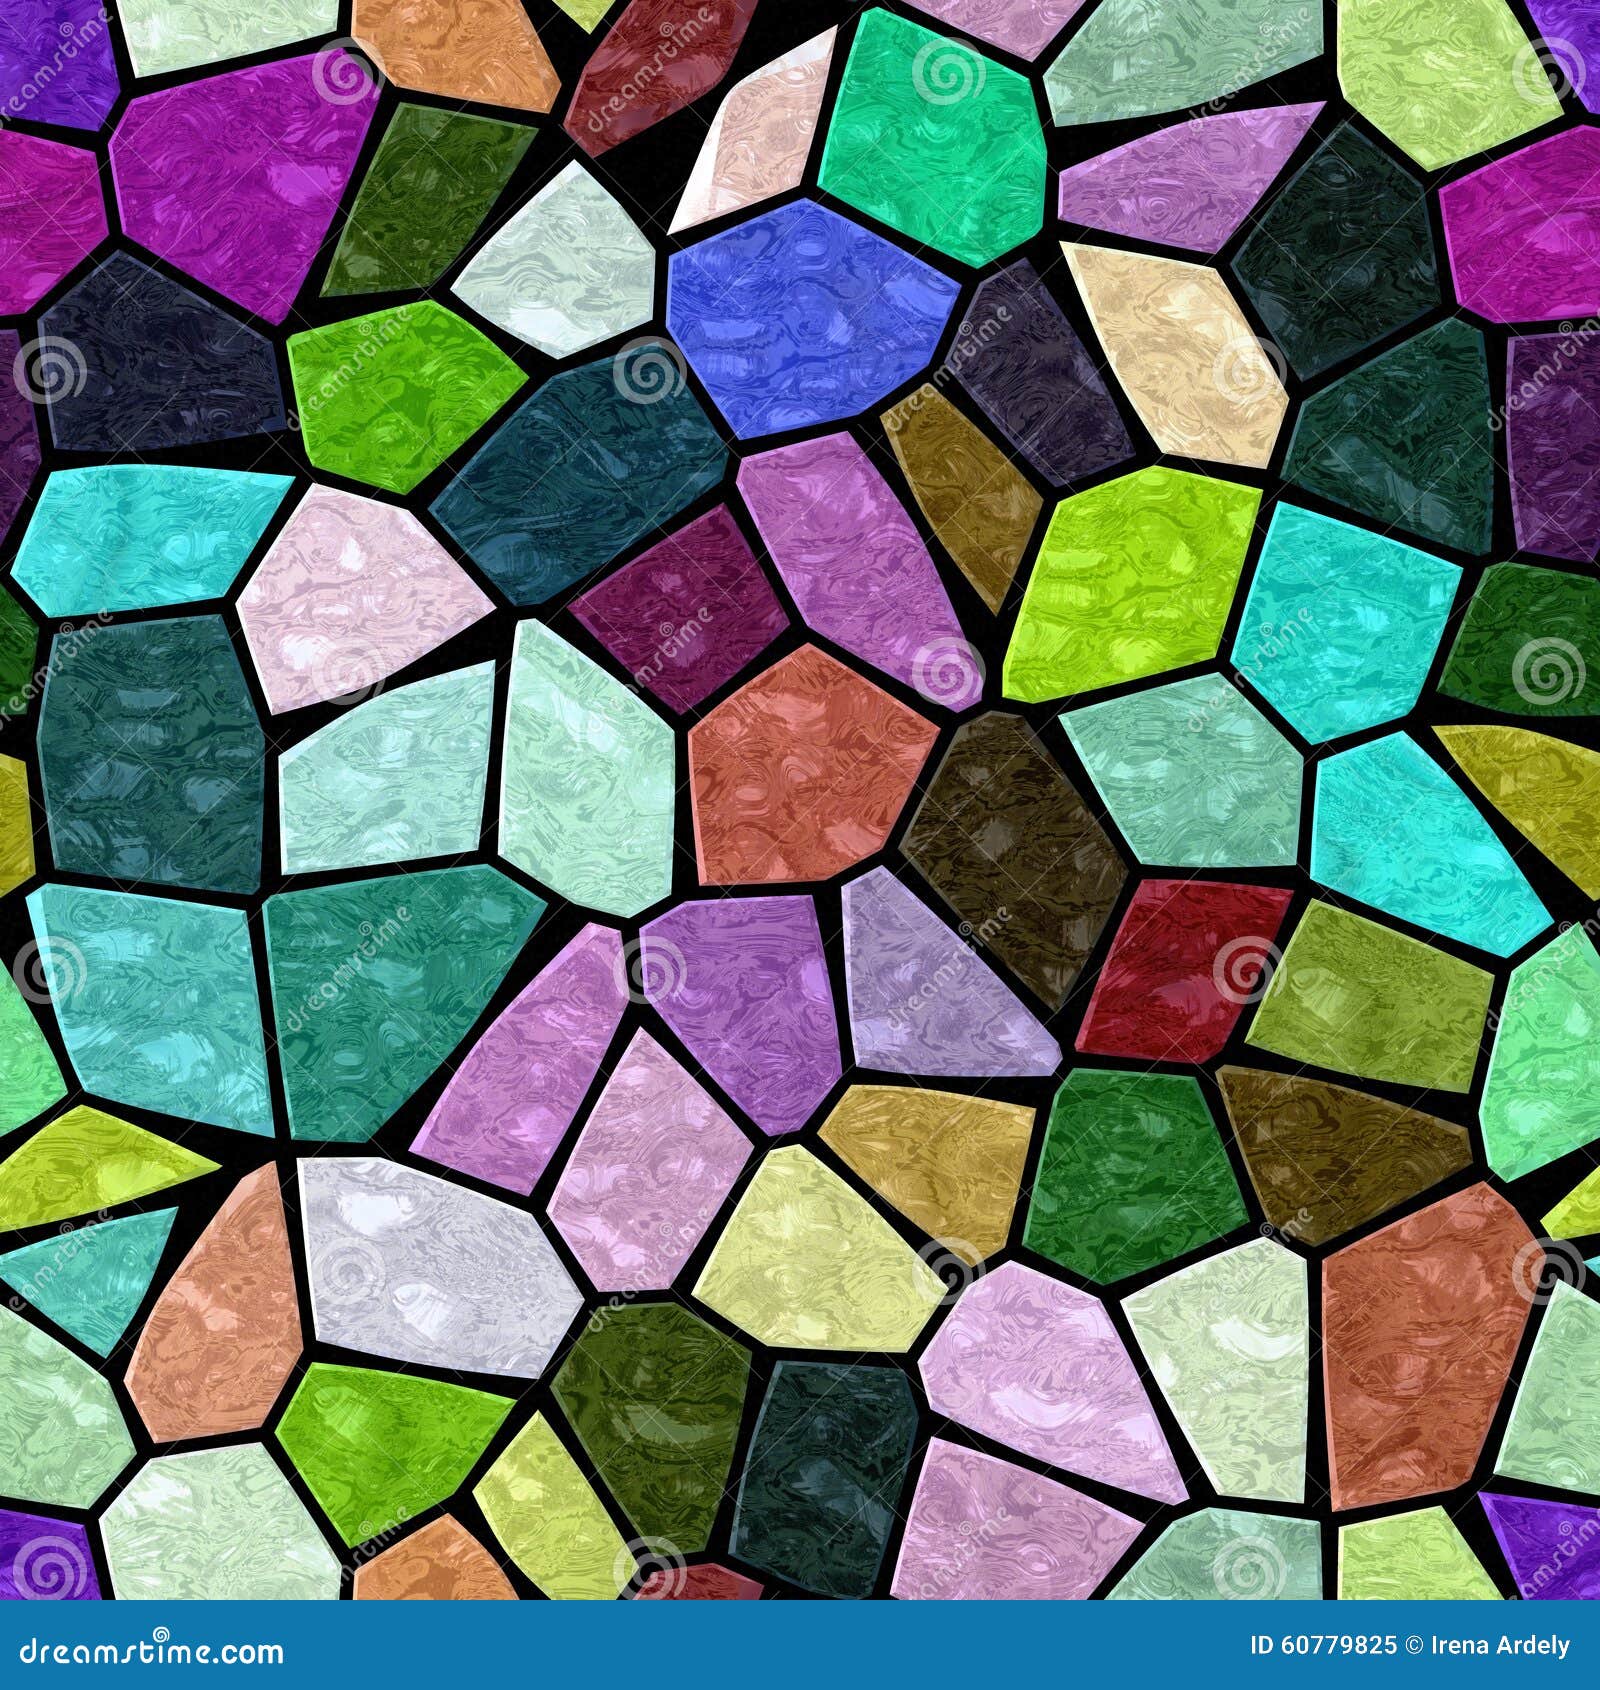 Glass-On-Glass Mosaic Grout Color